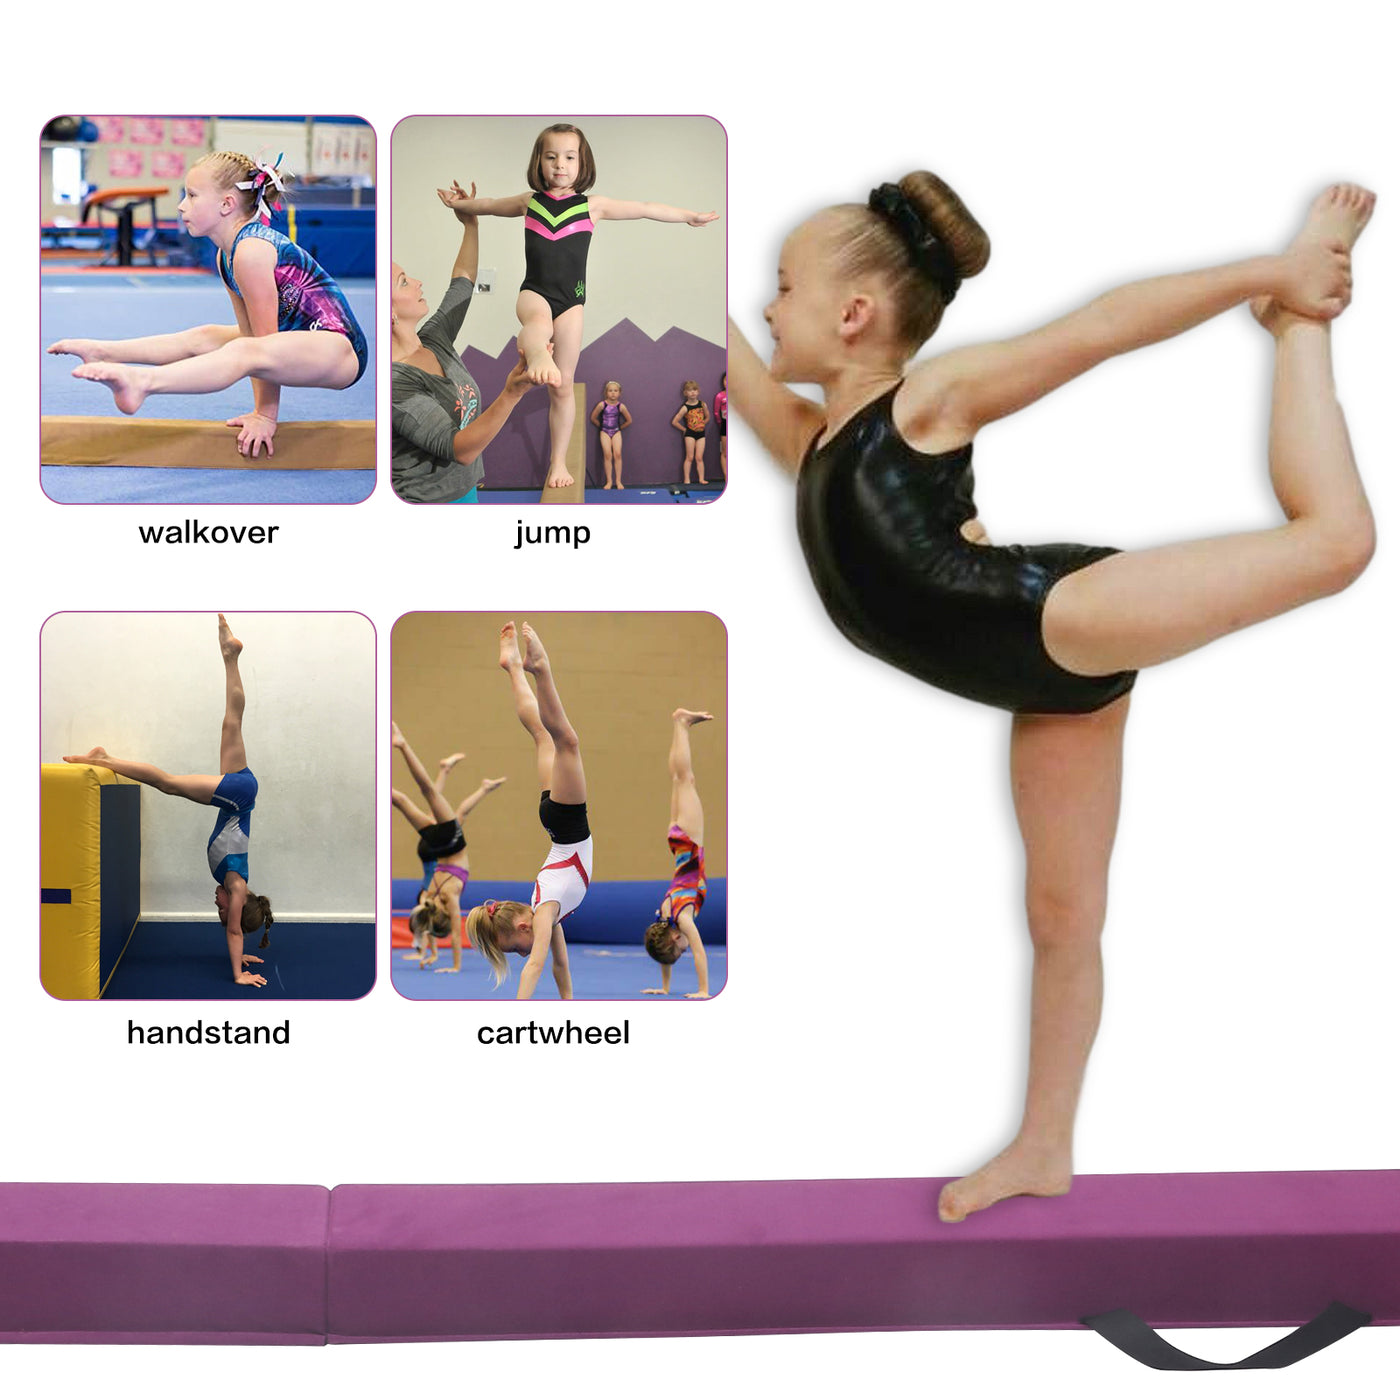 Gymnastics Balance Beam 6 Ft / 8 Ft / 9 Ft / 9.5 Ft for Home Use | Physical Therapy, Rehabilitation and Core Strength Training Foam Folding Floor Beam for Kids, Non Slip Walking Beam Floor Balance Base